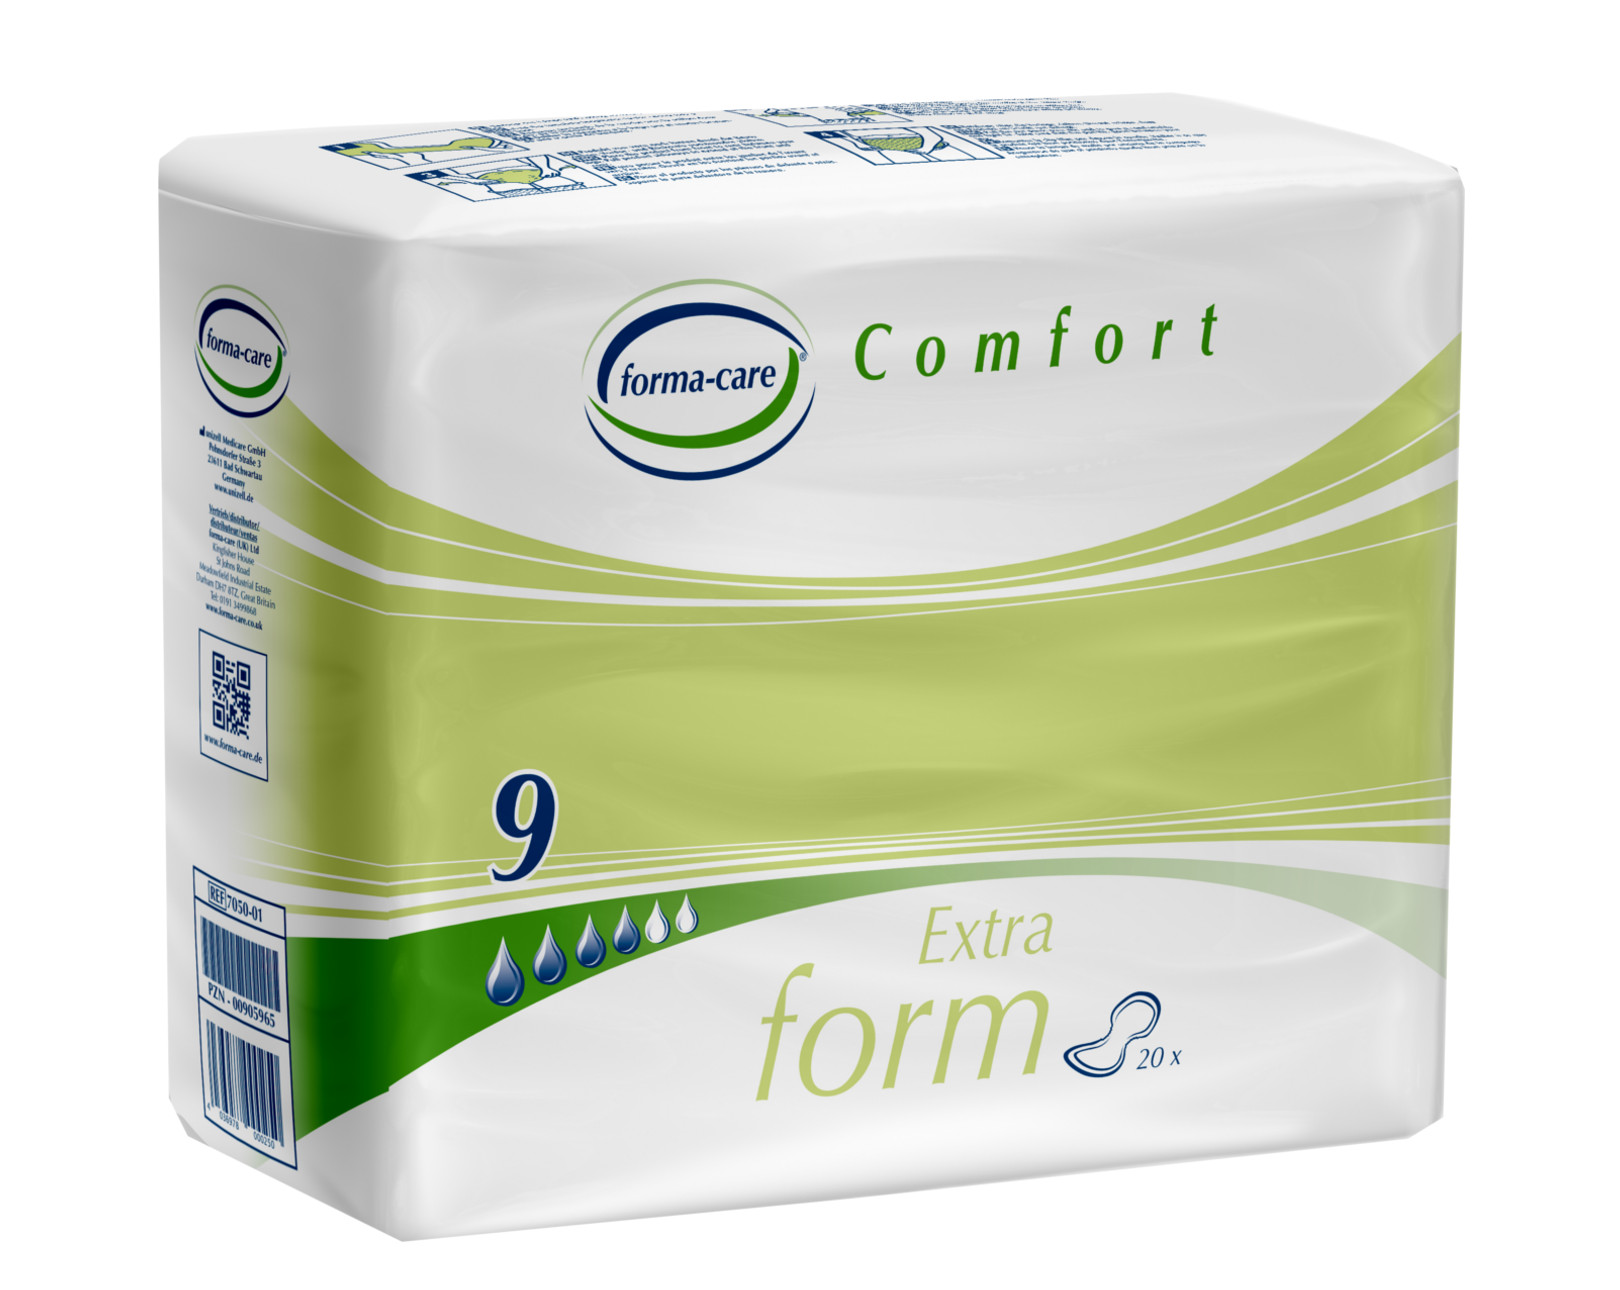 forma-care form comfort extra